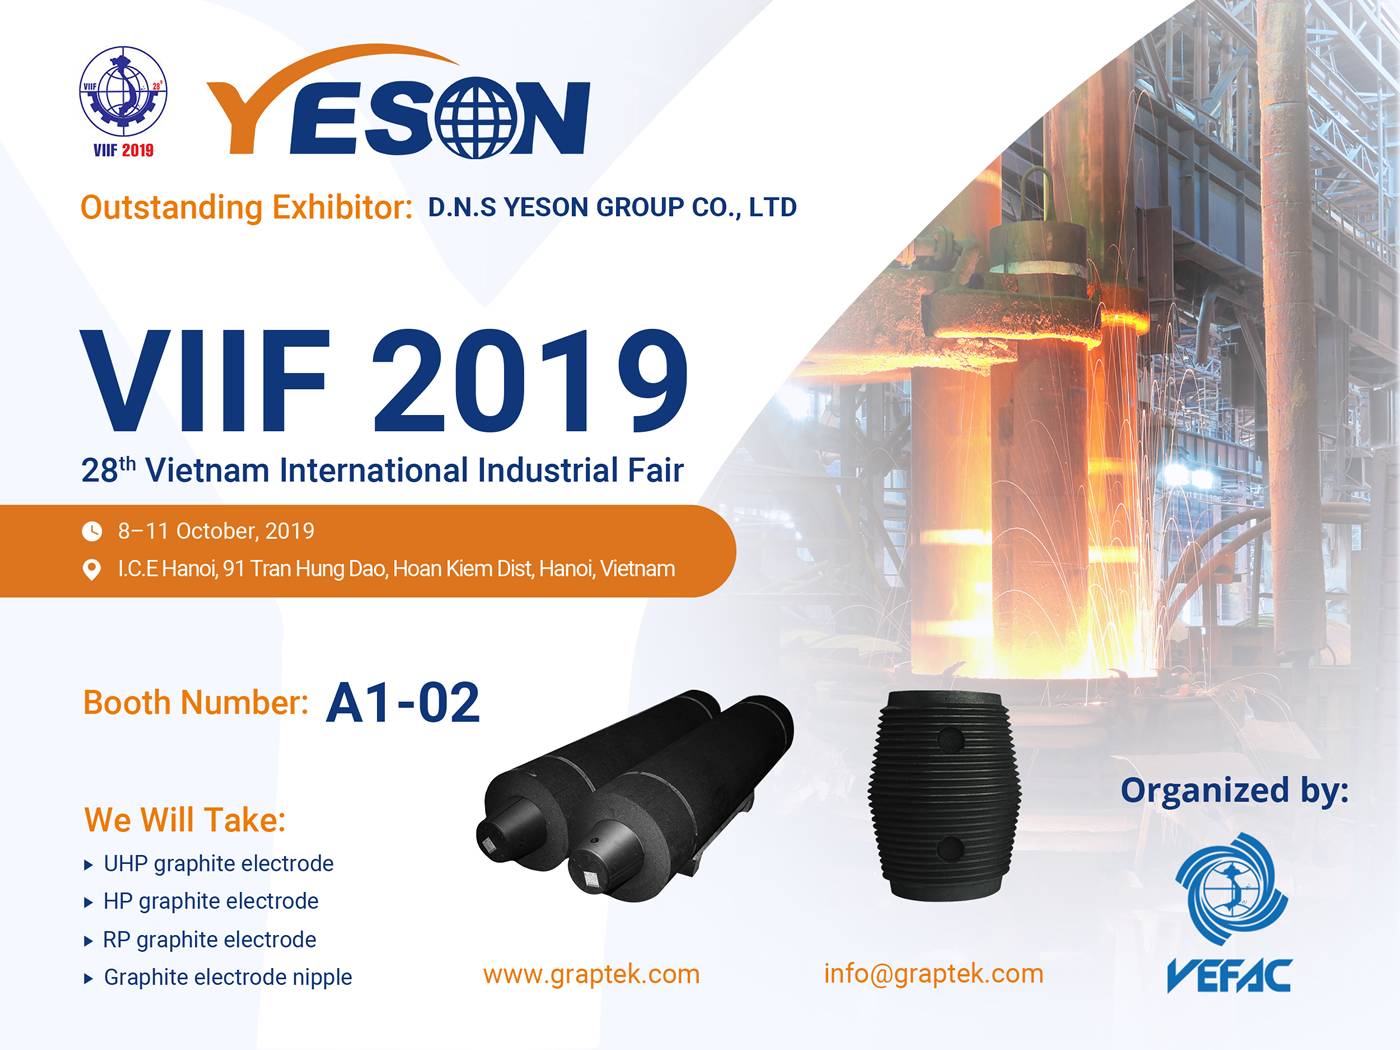 A promotional image about graphite electrode factory on Vietnam VIIF, 2019.